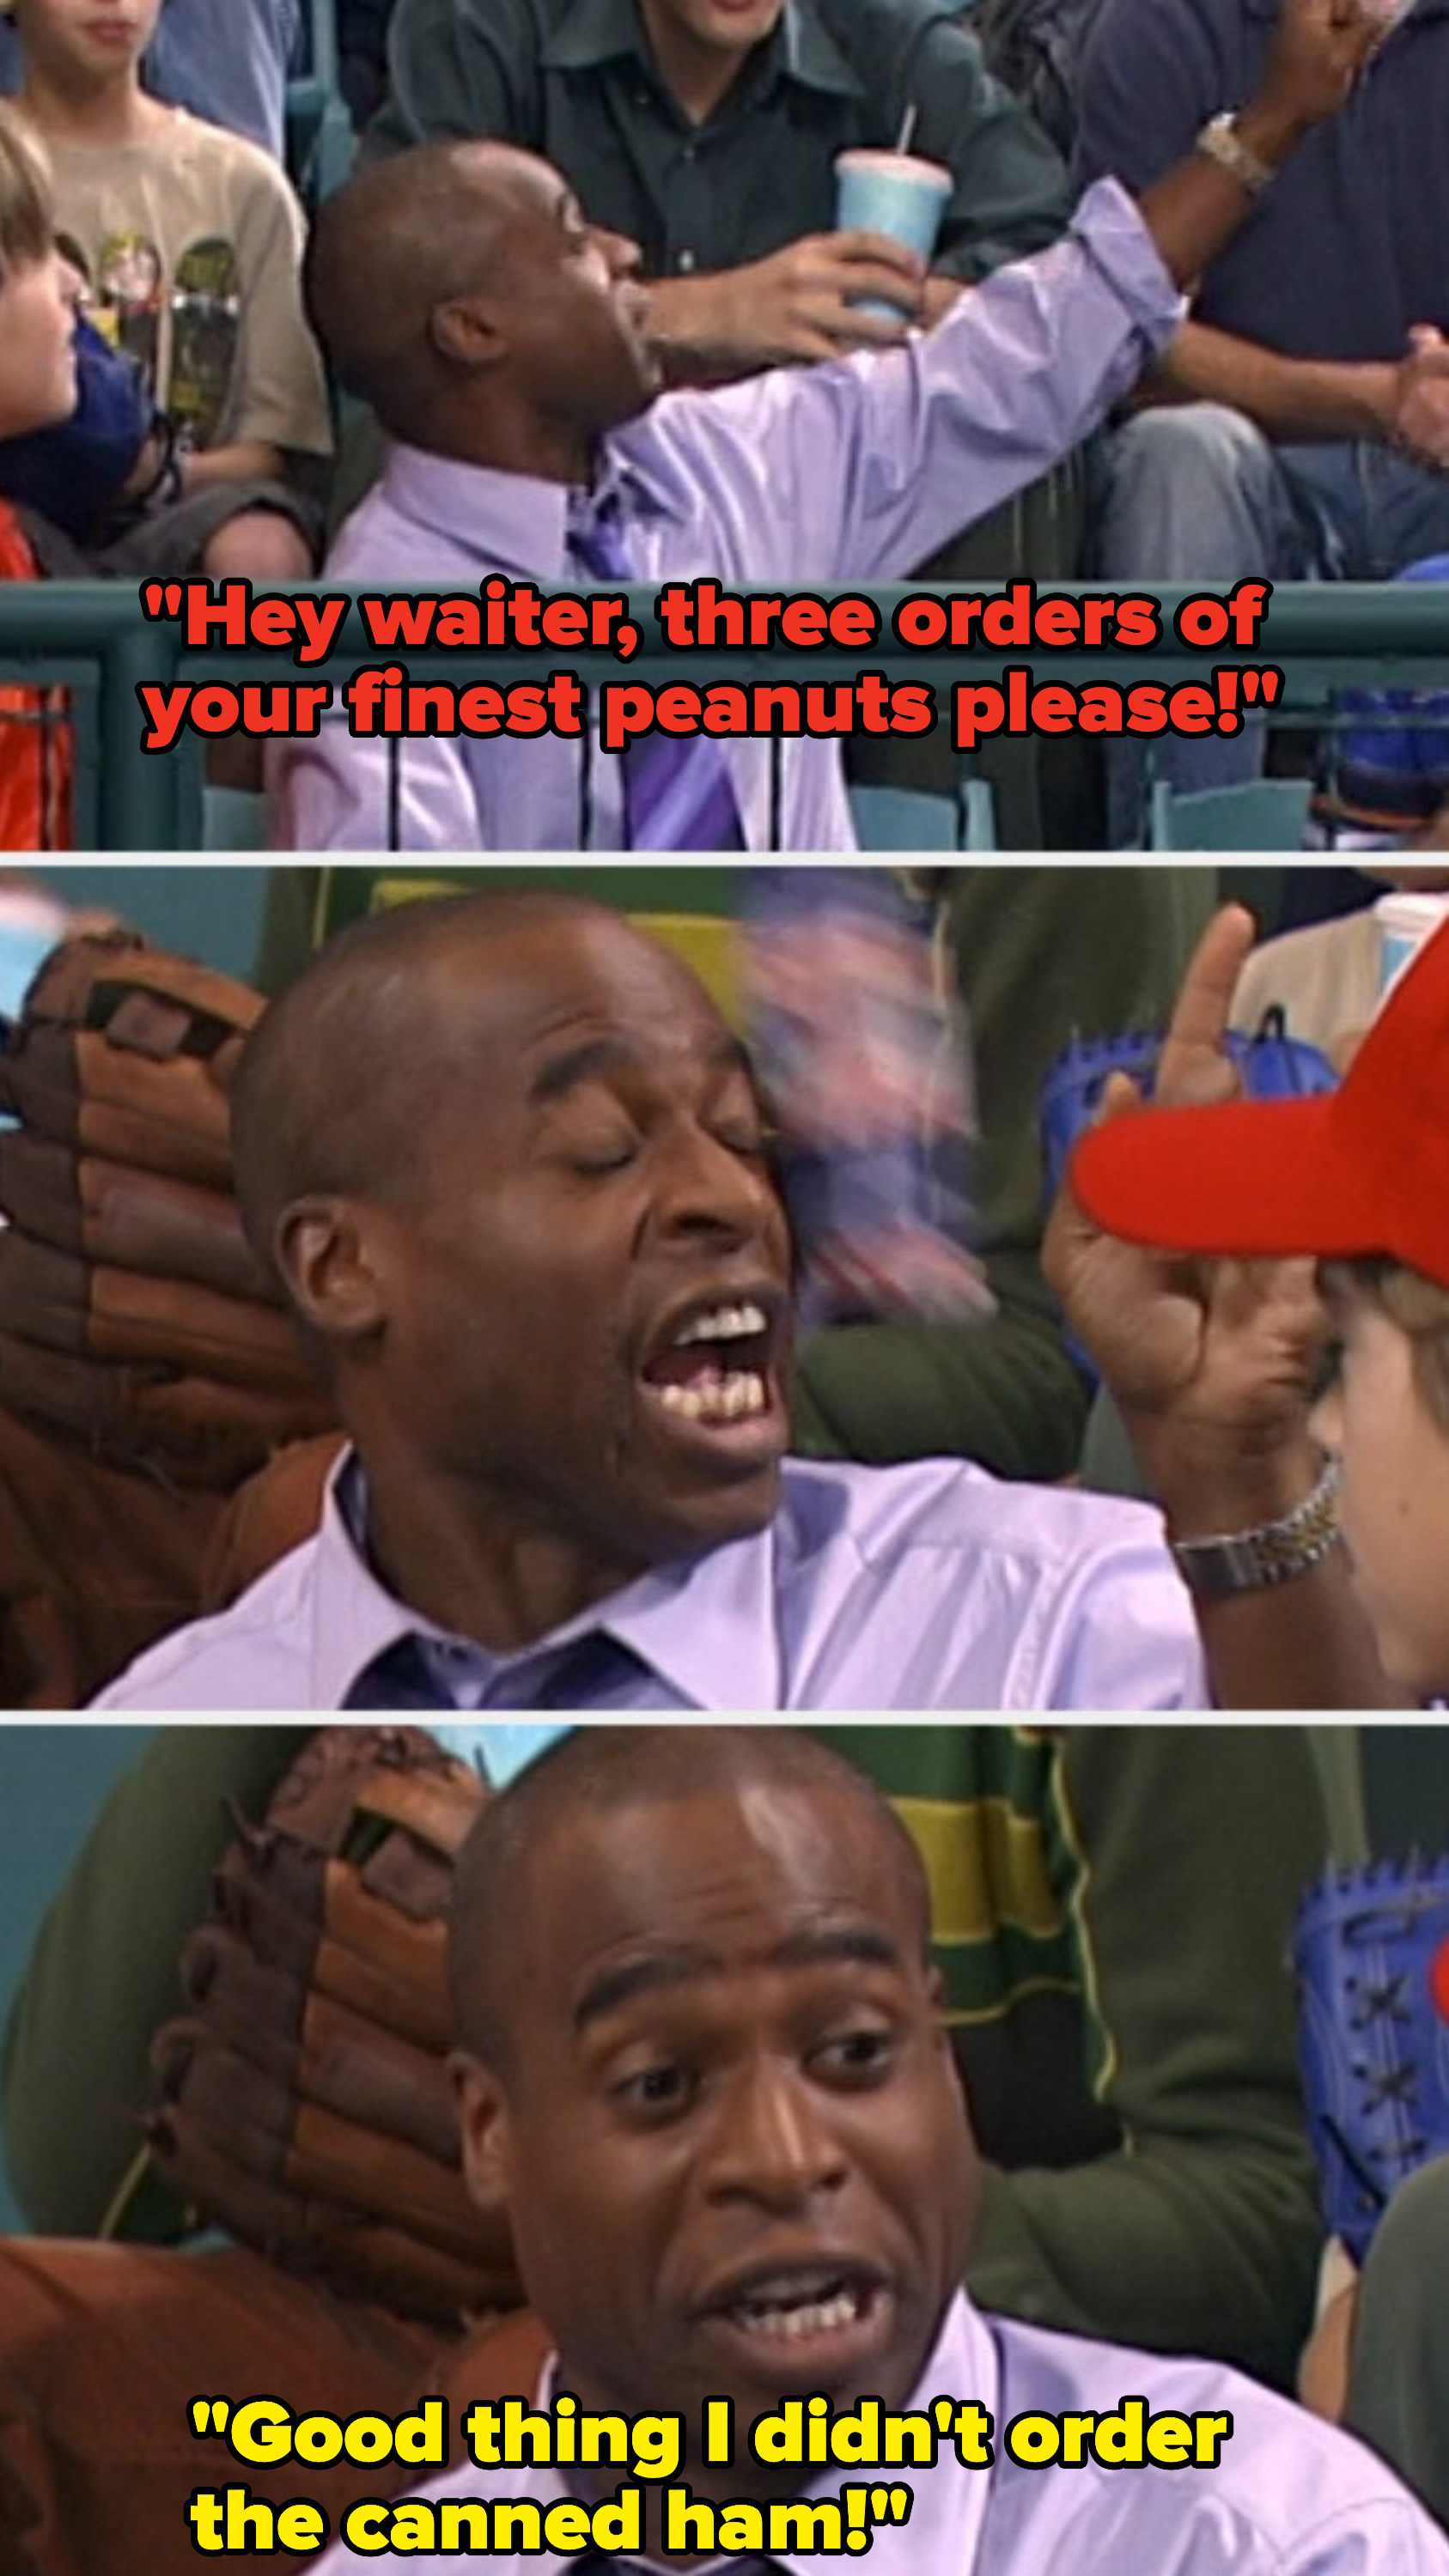 Mr. Moseby orders peanuts at a Red Sox game